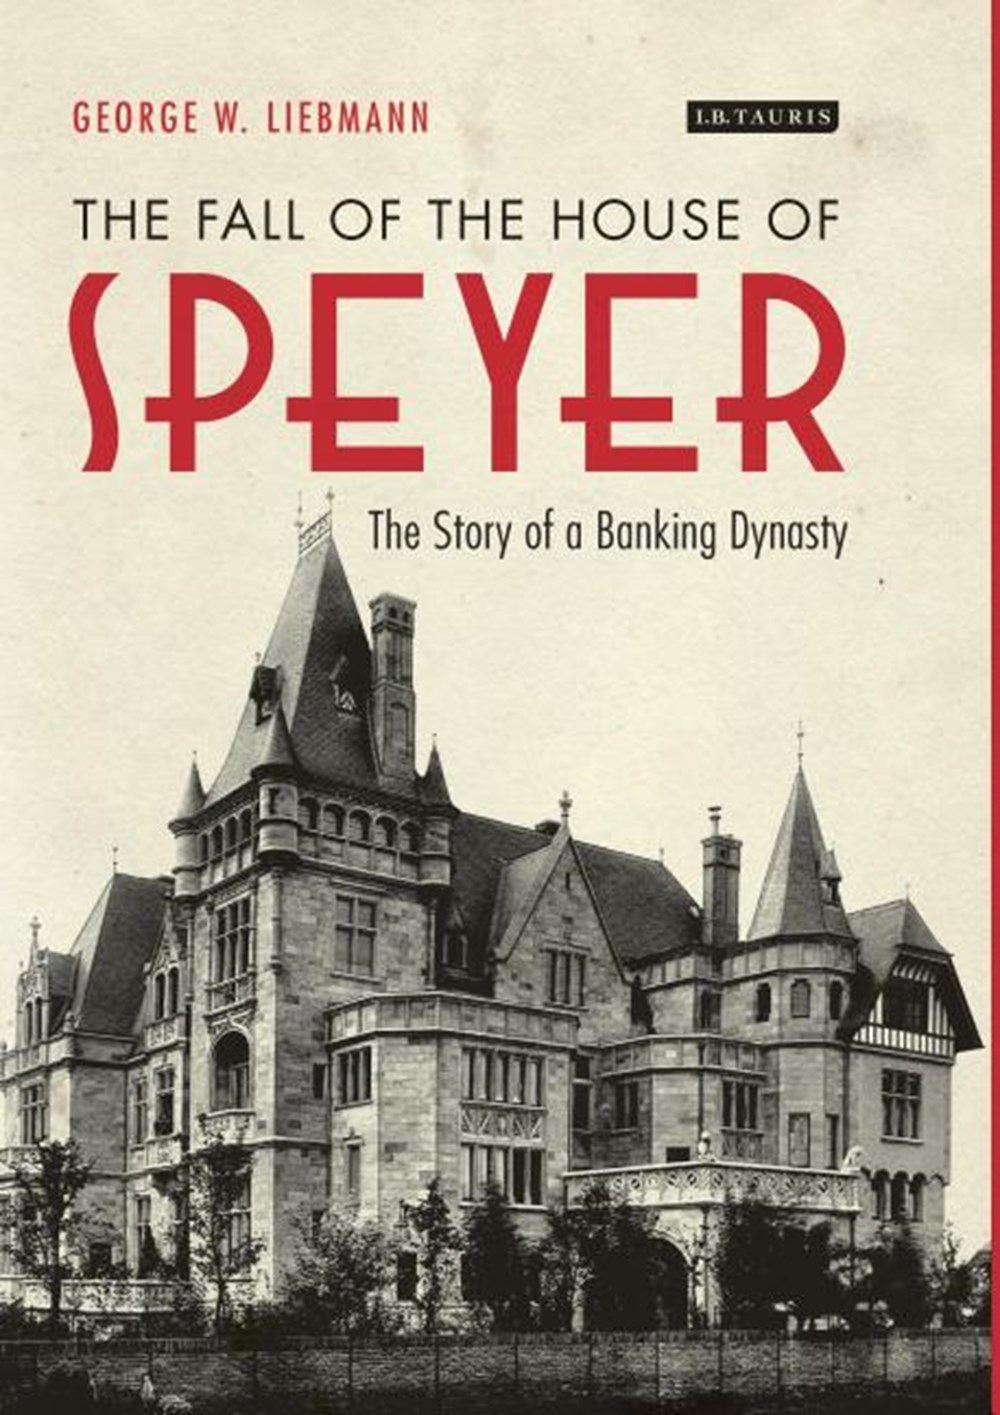 Fall of the House of Speyer: The Story of a Banking Dynasty